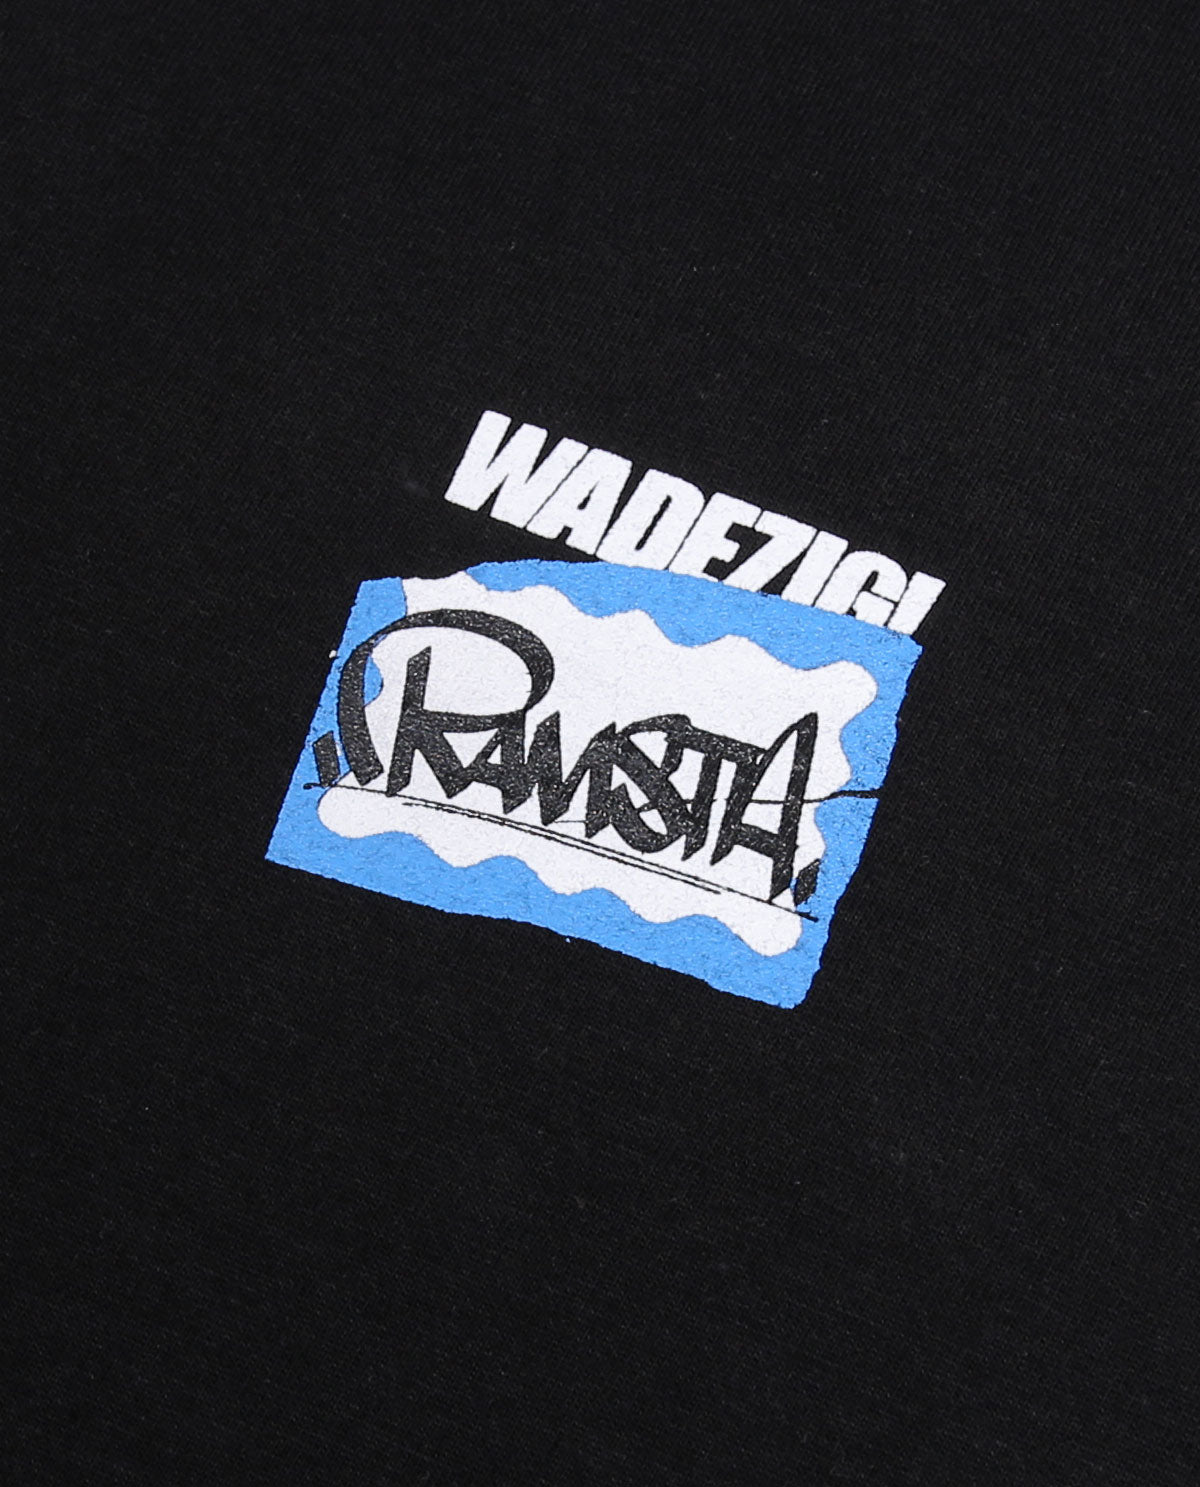 WADEZIG! T-SHIRT - COME ON BY RAMSTA